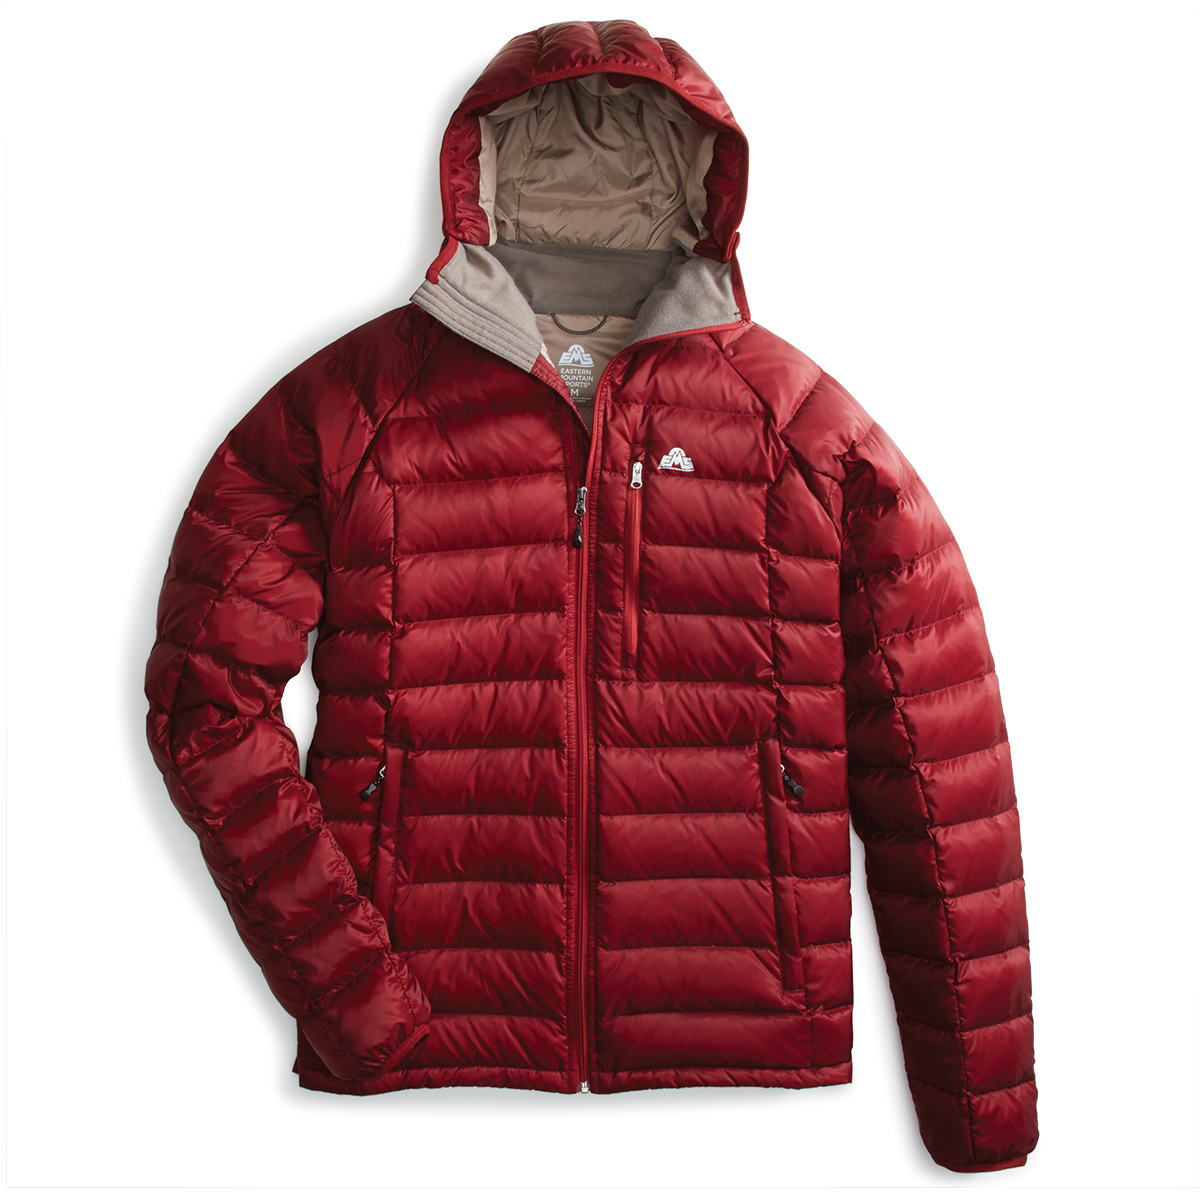 Ems Men's Featherpack Hooded Jacket - Red, S